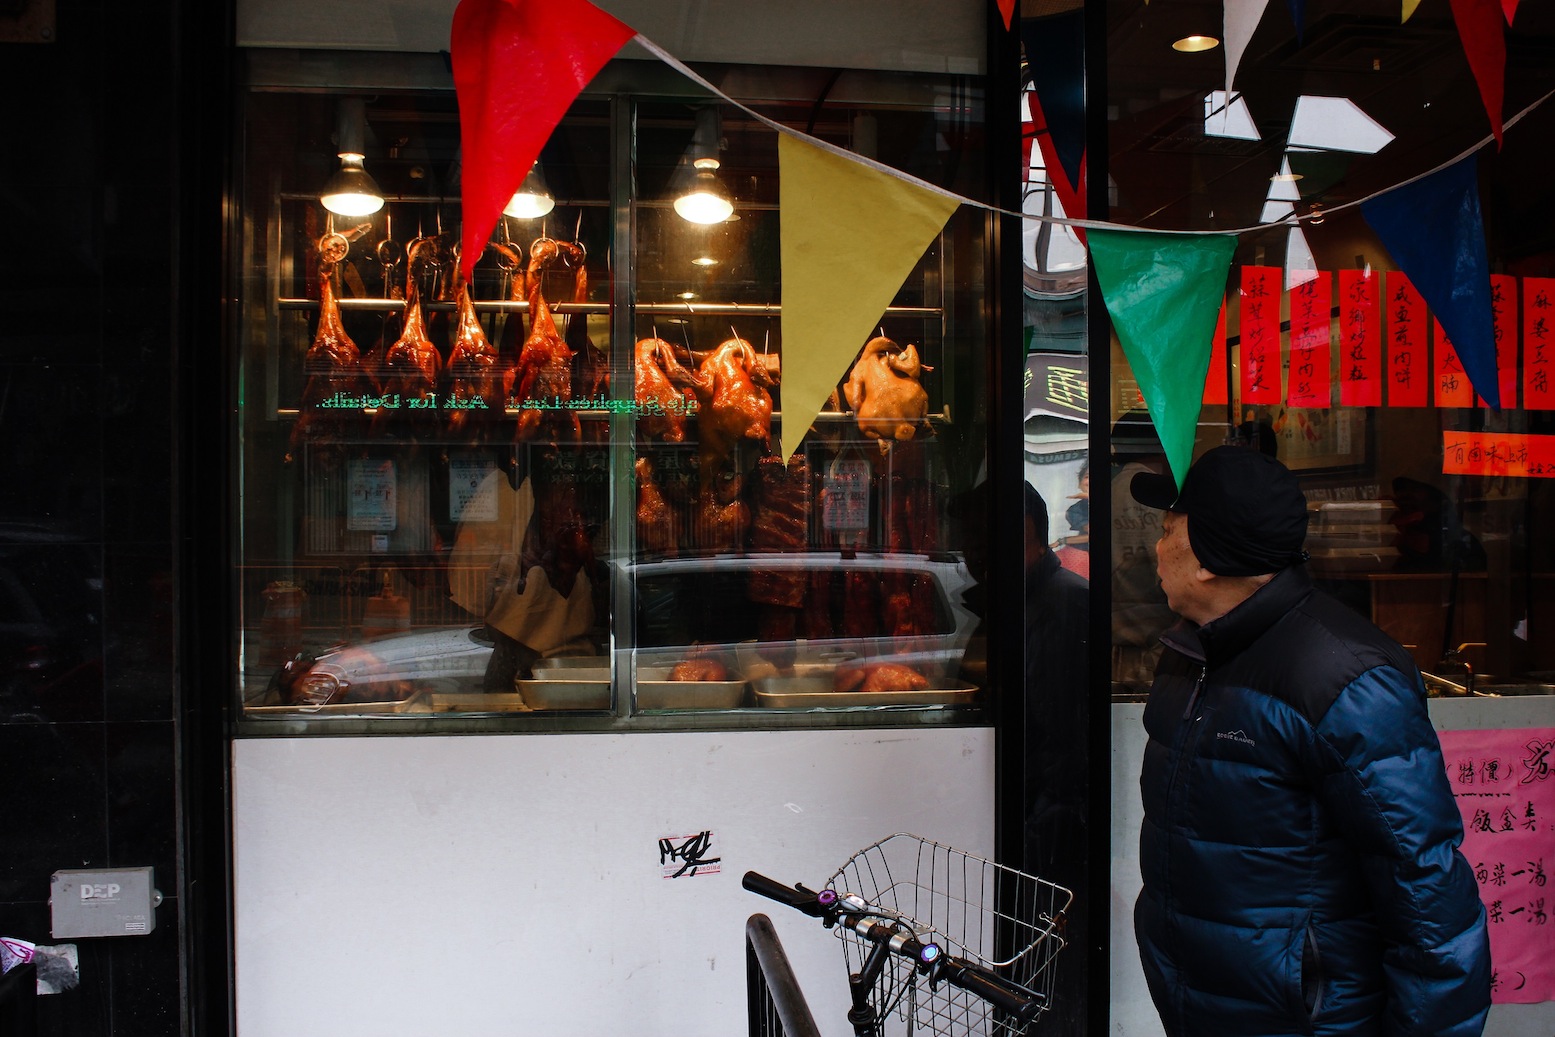 A passerby looks into the window of a restaurant in Chinatown. Photo by Brian Nunes.